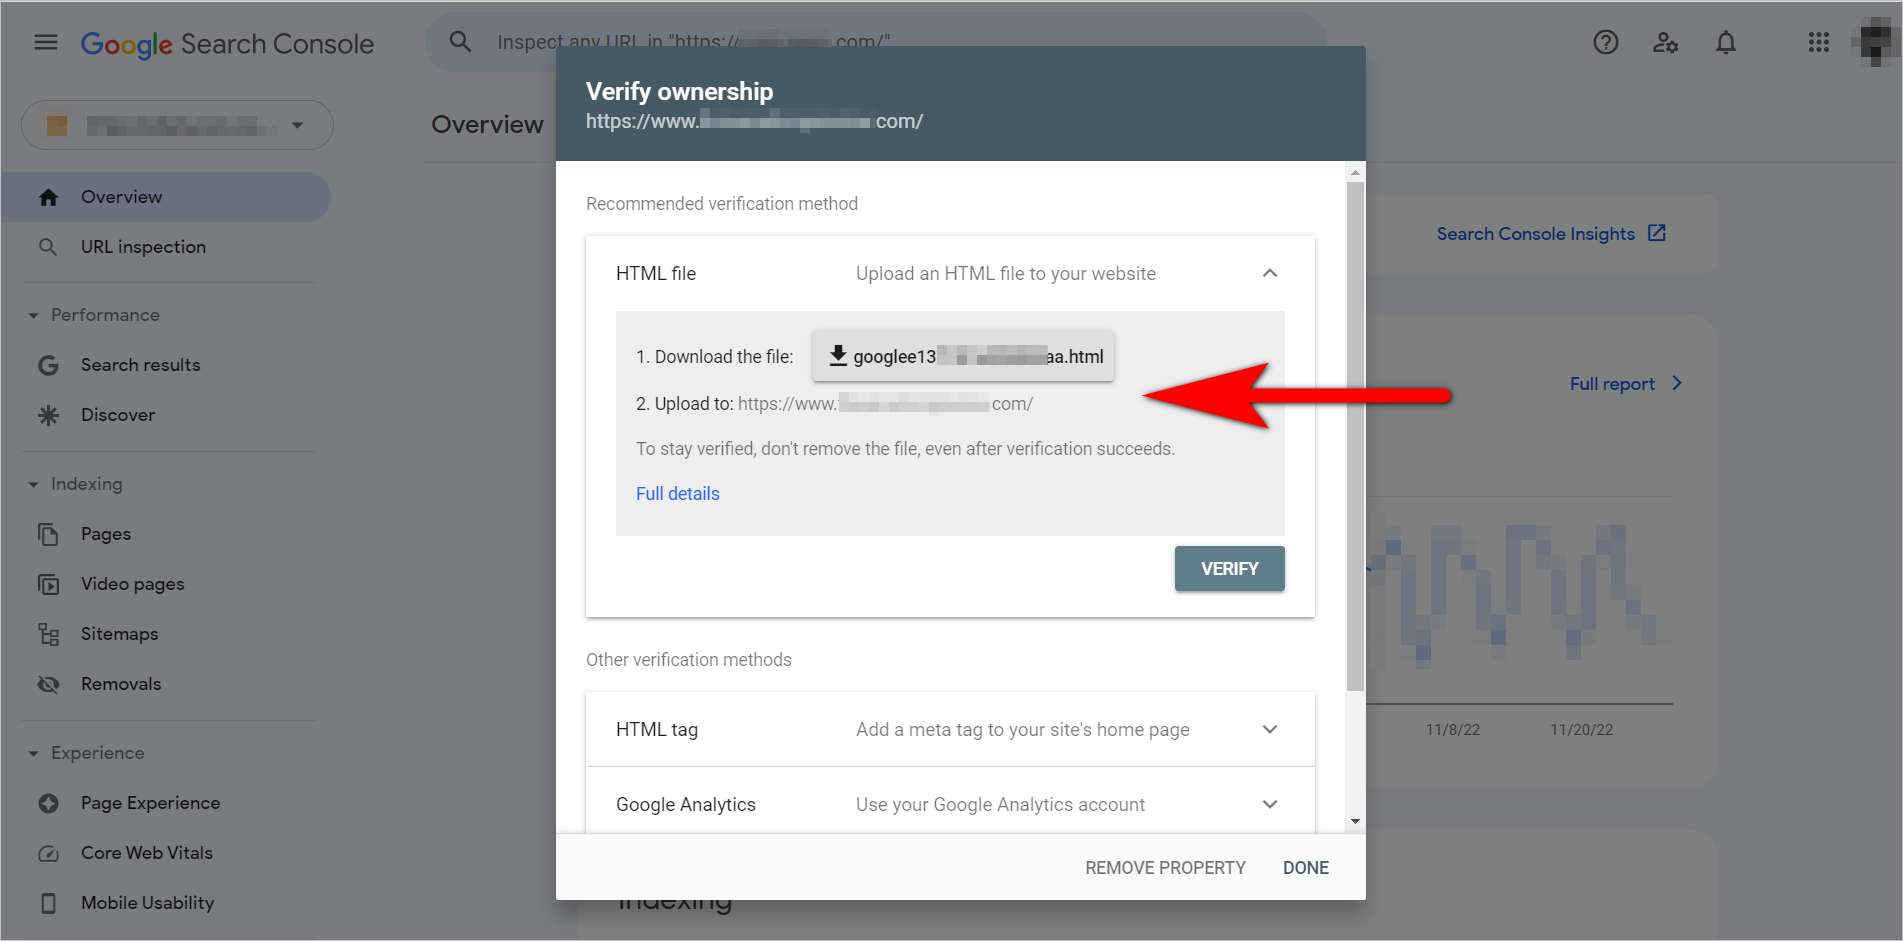 Google Search Console Basics – Verify ownership modal displayed after the user has inputted their URL in the previous popup.